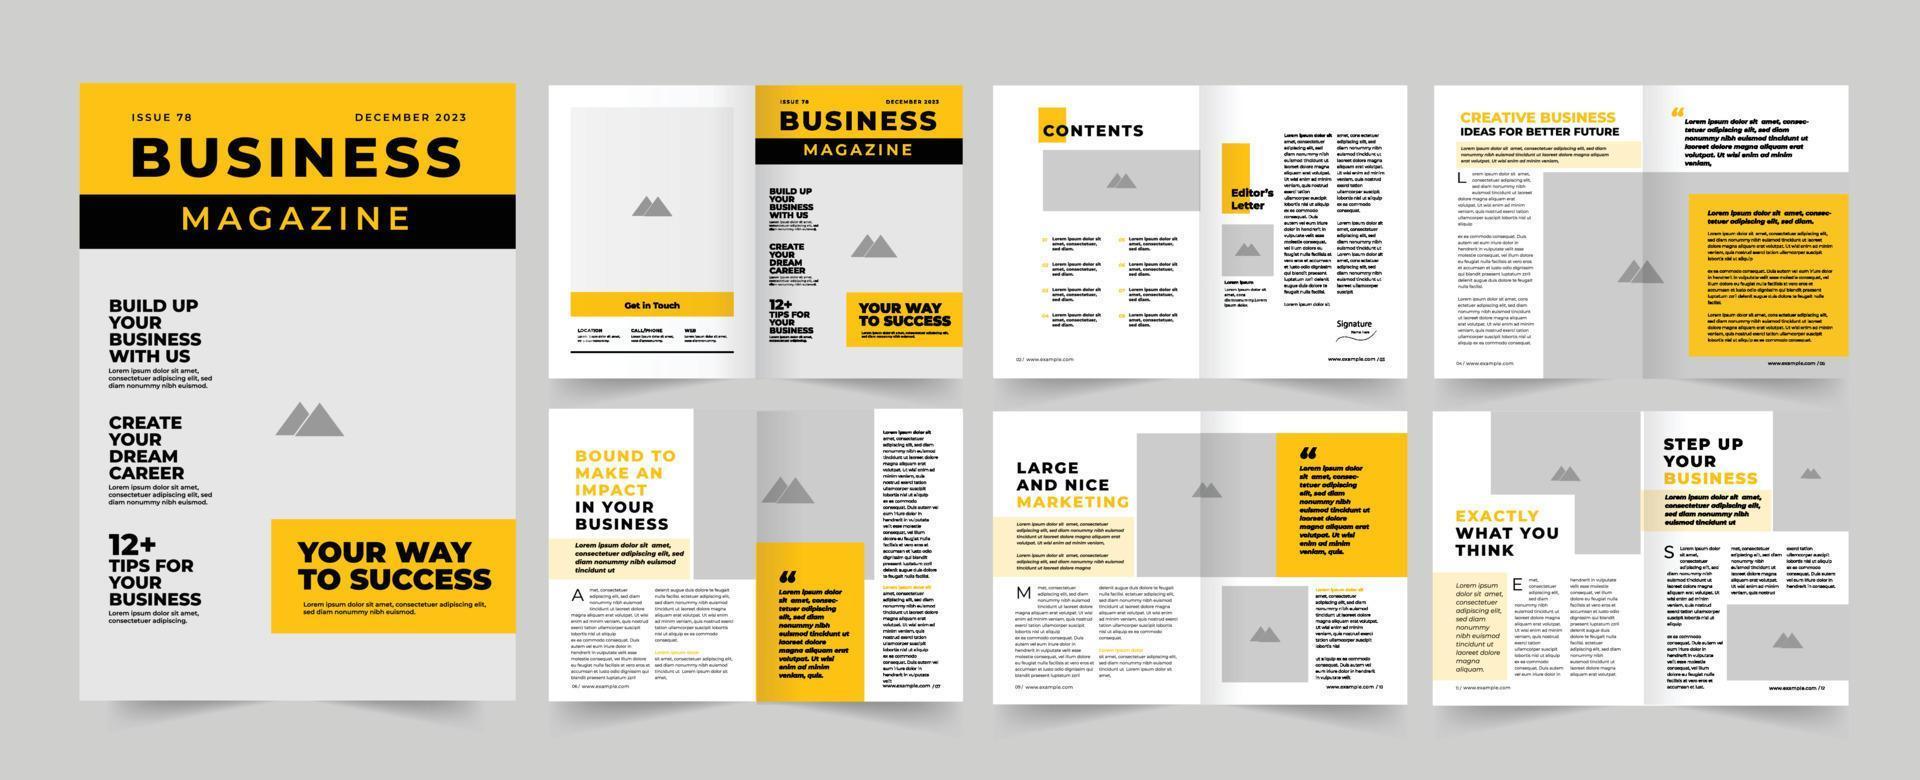 Business Magazine Layout Template Design vector